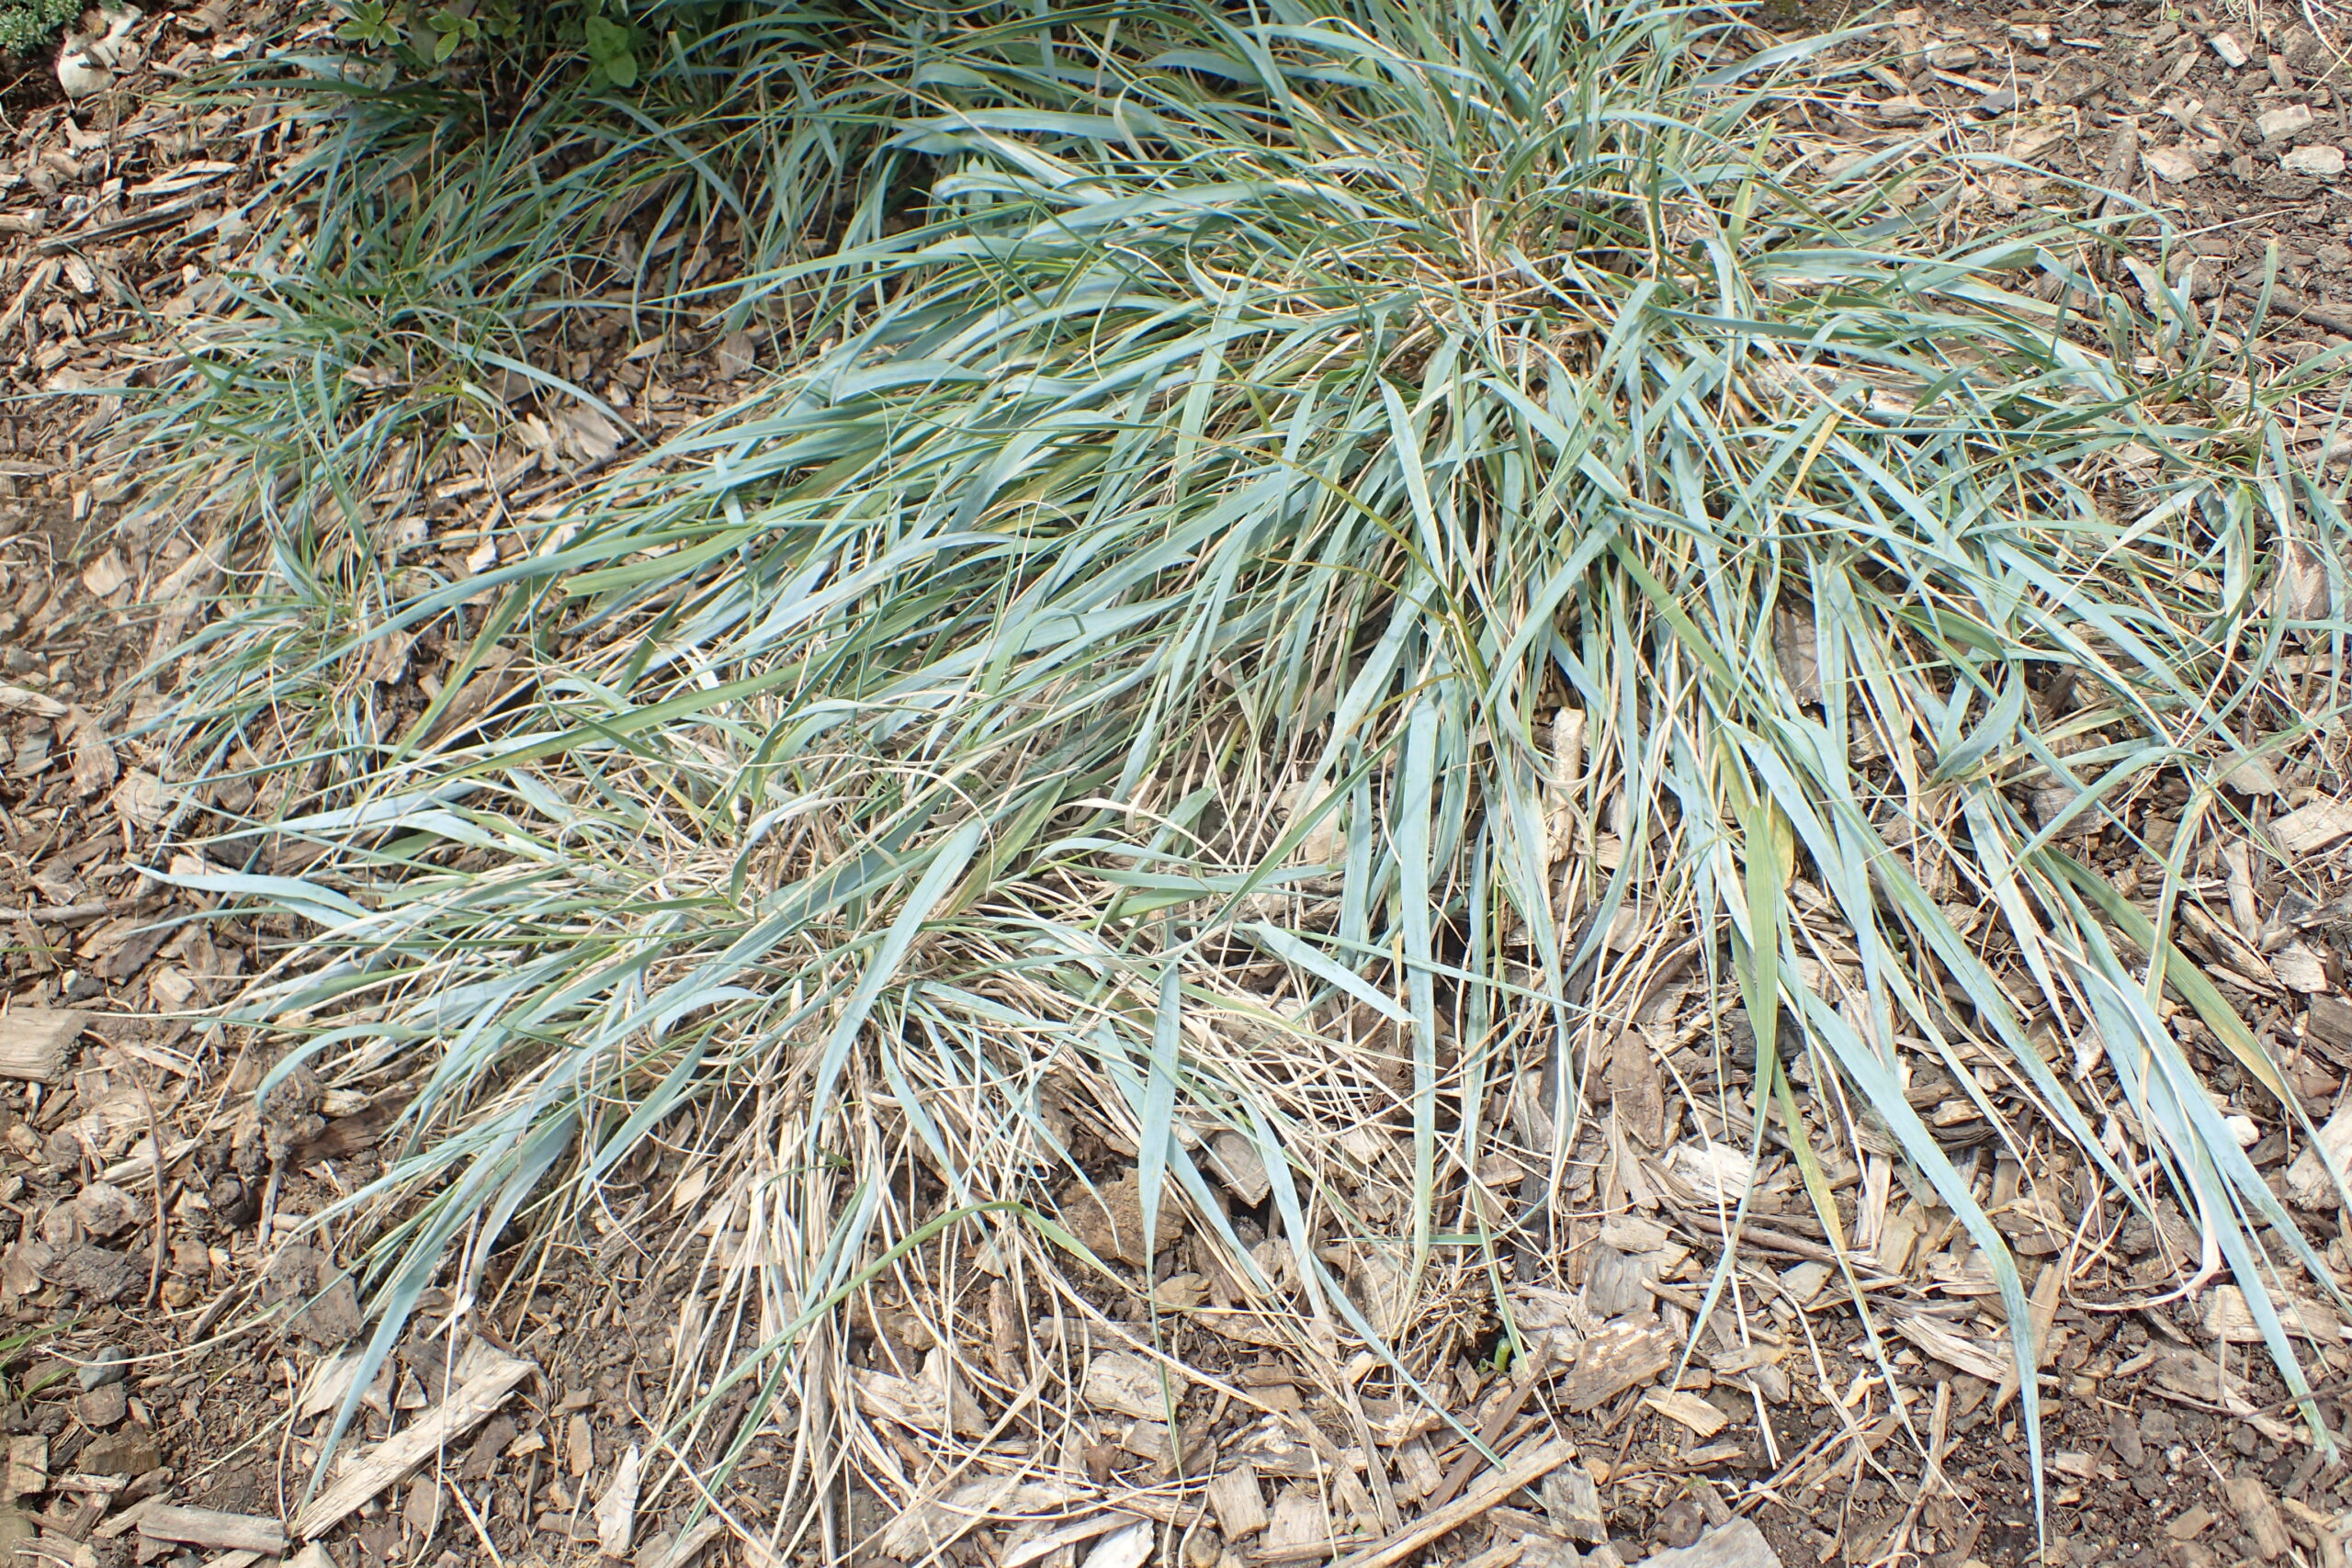 Photograph of clumps of blue wheatgrass growing in mulch in a botanical garden. The leaves of the grass are blue-green and laying relatively flat on the ground.